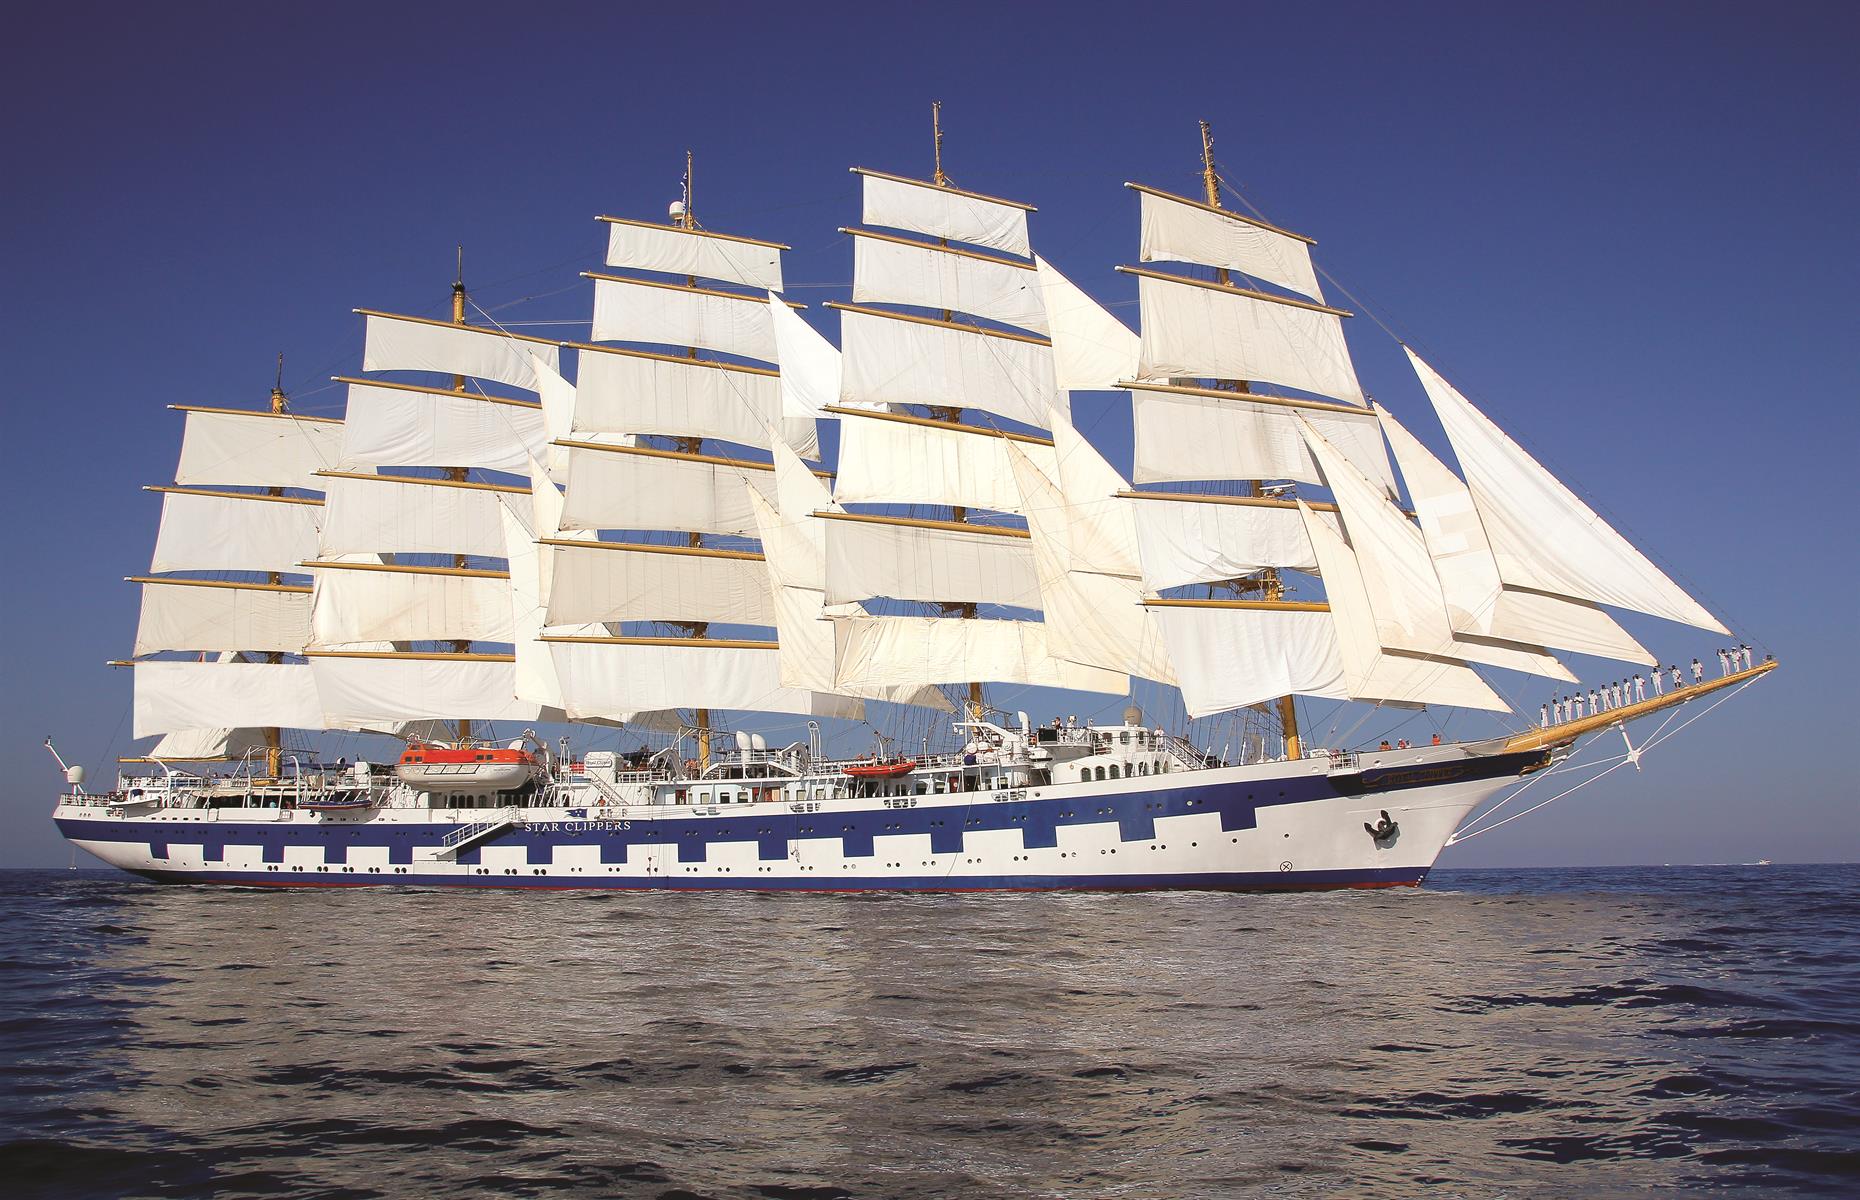 <p><a href="https://www.starclippers.co.uk/our-fleet/tall-ships/introducing-royal-clipper.html">Royal Clipper</a> is one of Star Clippers’ three tall ships and officially the largest square rigger in service. The elegant vessel cuts through the water gracefully, just like the legendary clippers from a bygone era. The five-masted, fully rigged tall ship, which has 42 sails, is beautiful to look at. Her Clipper heritage is reflected in polished brass and gleaming brightwork, expansive teak decks, swimming pools, informal dining, a convivial tropical bar and a comfortable piano bar.</p>